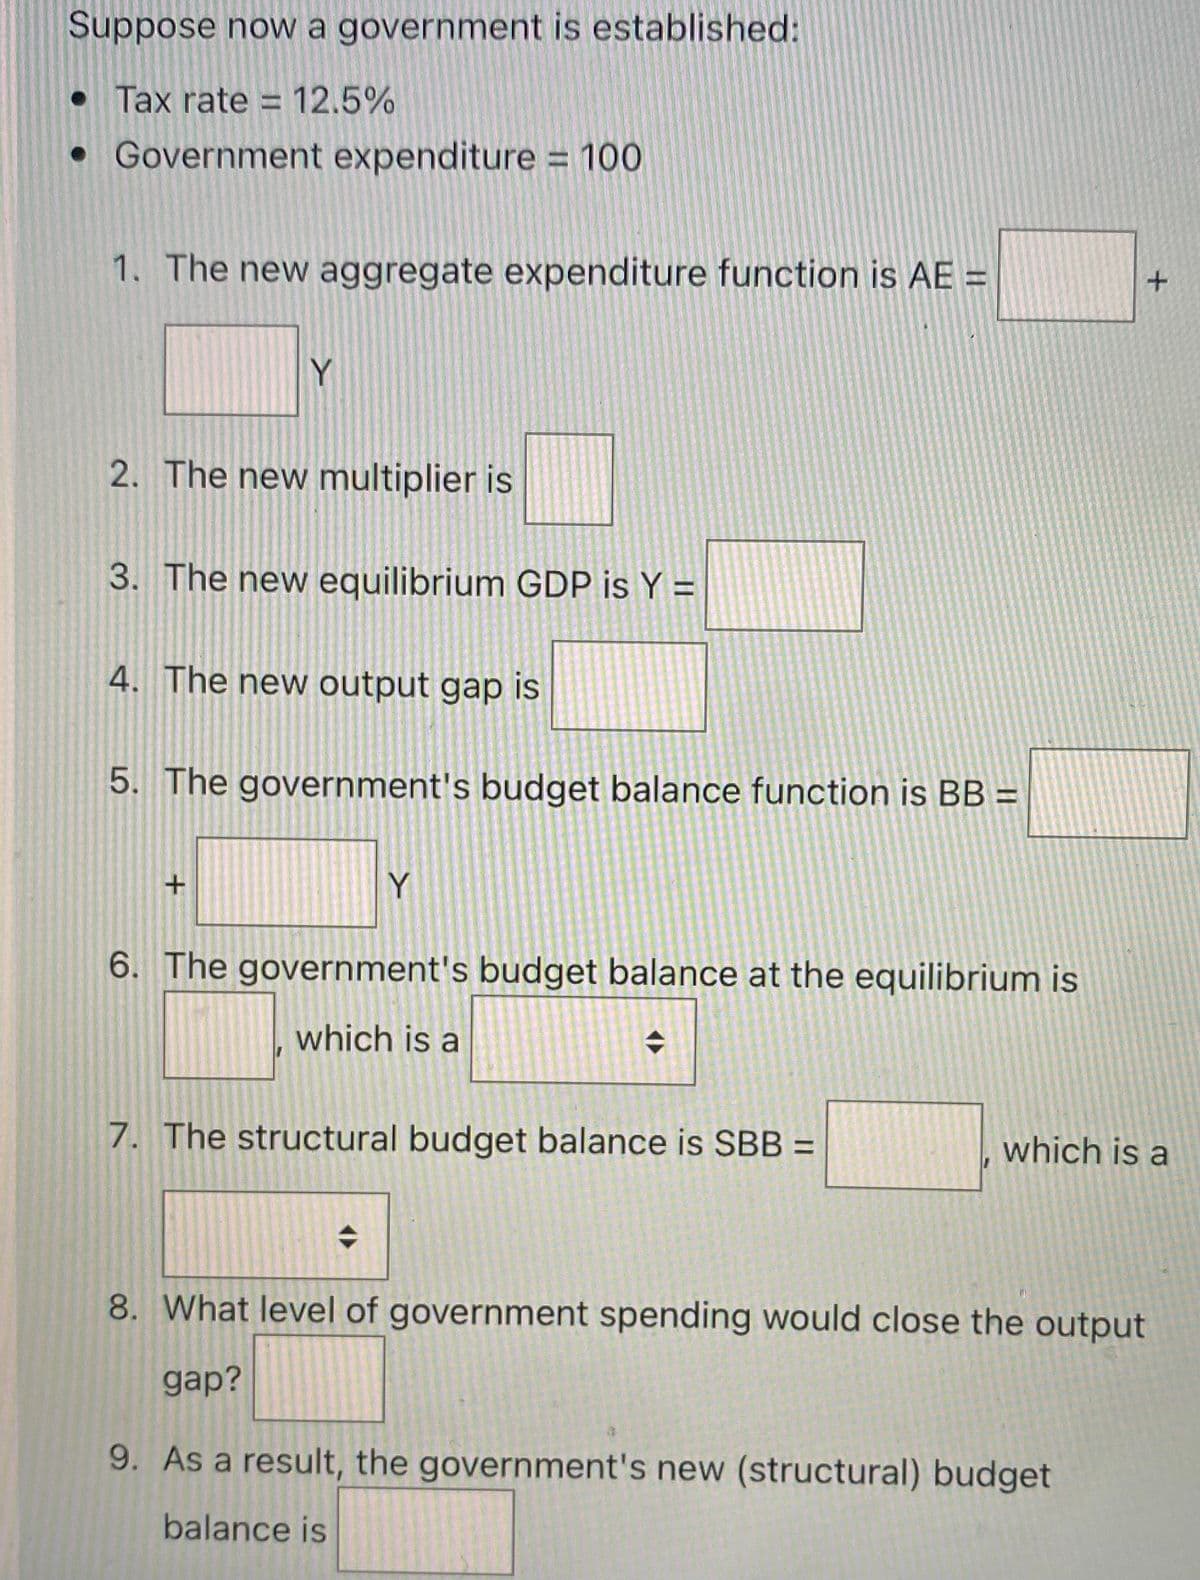 Suppose now a government is established:
• Tax rate = 12.5%
• Government expenditure = 100
1. The new aggregate expenditure function is AE =
Y
2. The new multiplier is
3. The new equilibrium GDP is Y =
4. The new output gap is
5. The government's budget balance function is BB =
Y
6. The government's budget balance at the equilibrium is
which is a
7. The structural budget balance is SBB =
which is a
8. What level of government spending would close the output
gap?
9. As a result, the government's new (structural) budget
balance is
